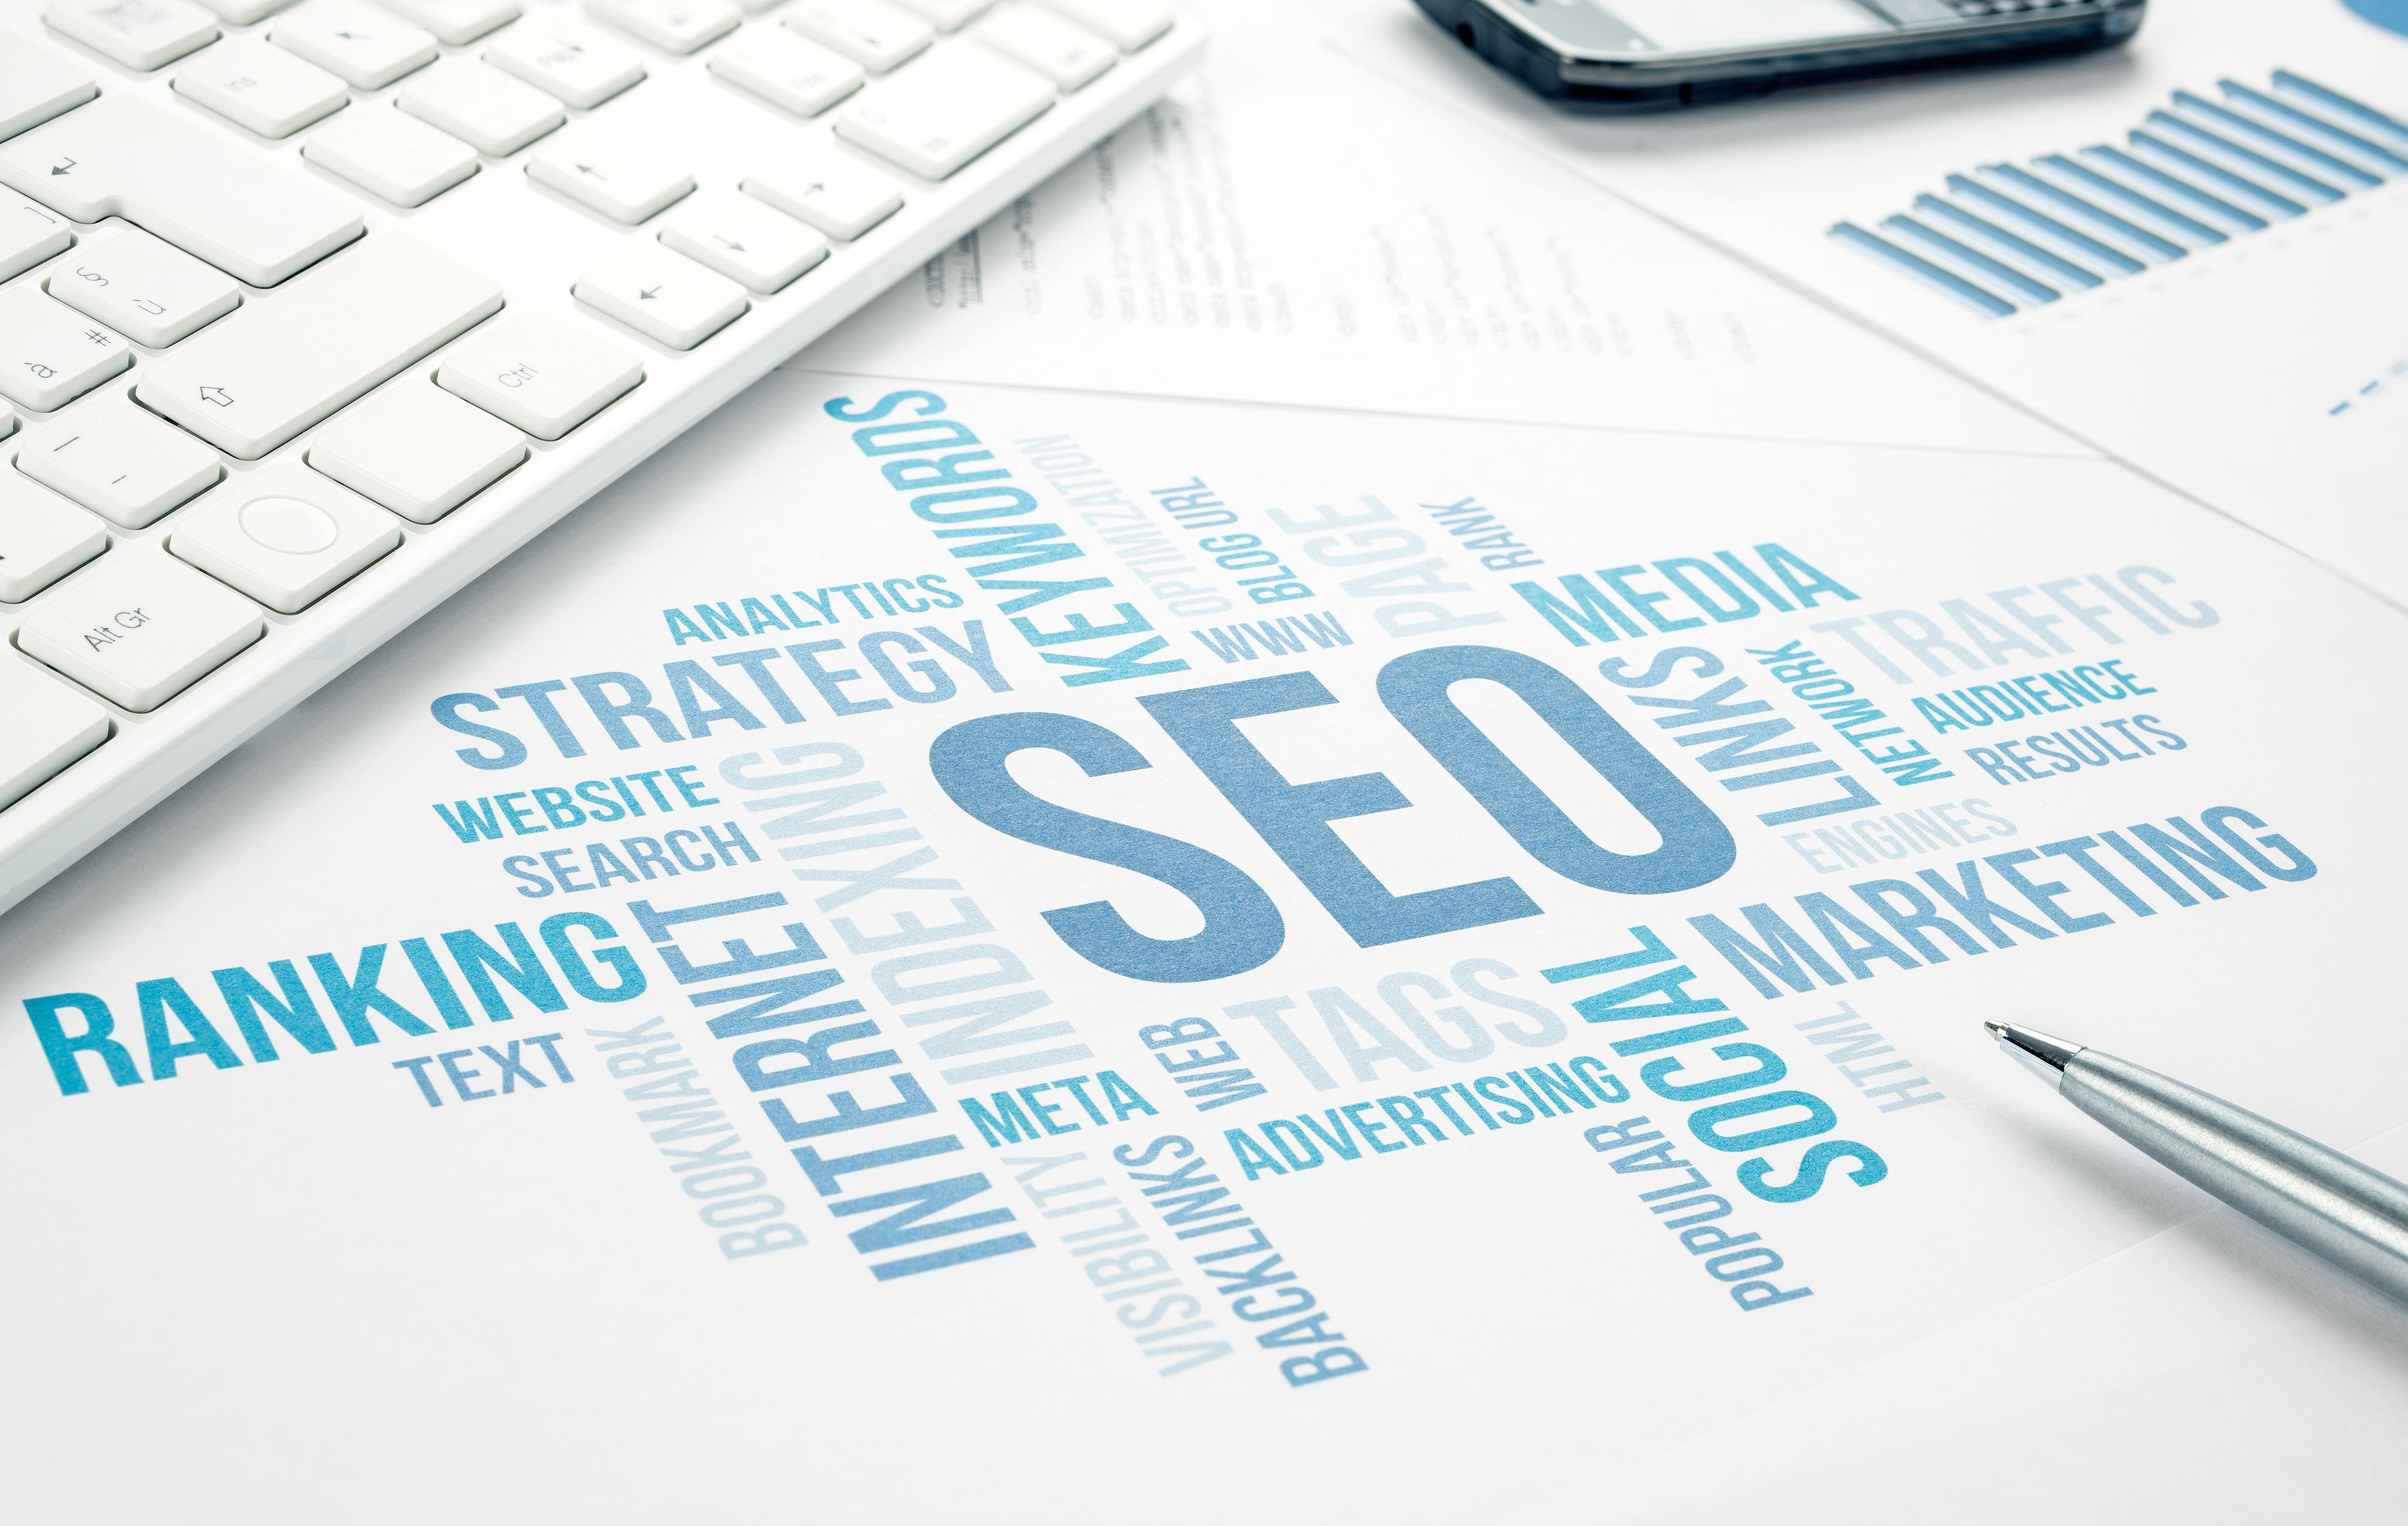 There is NO Question About It, this SEO Company in Santa Rosa, CA Works!